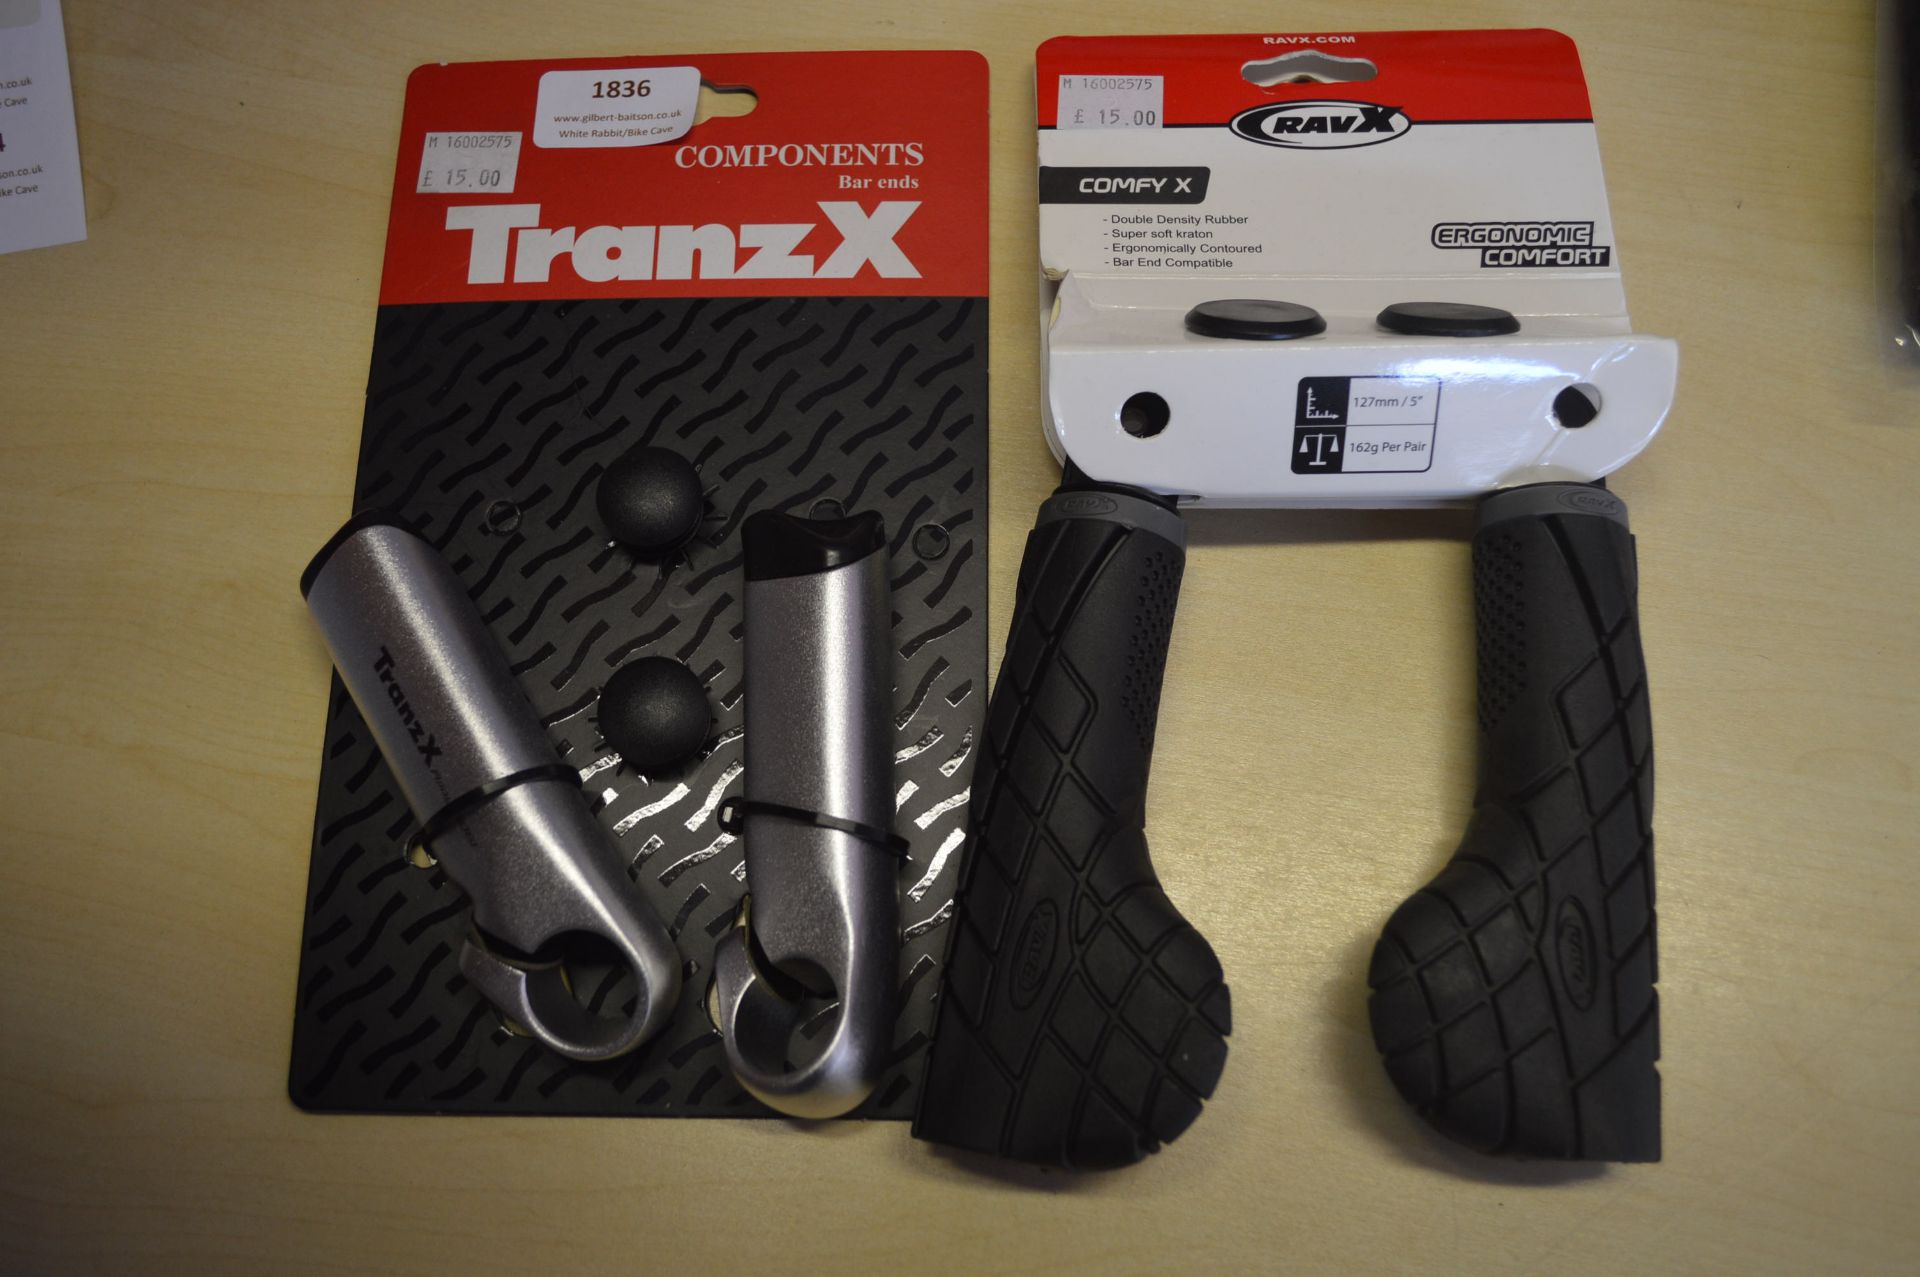 *2x Pairs of Bar Ends by TranzX and RavX